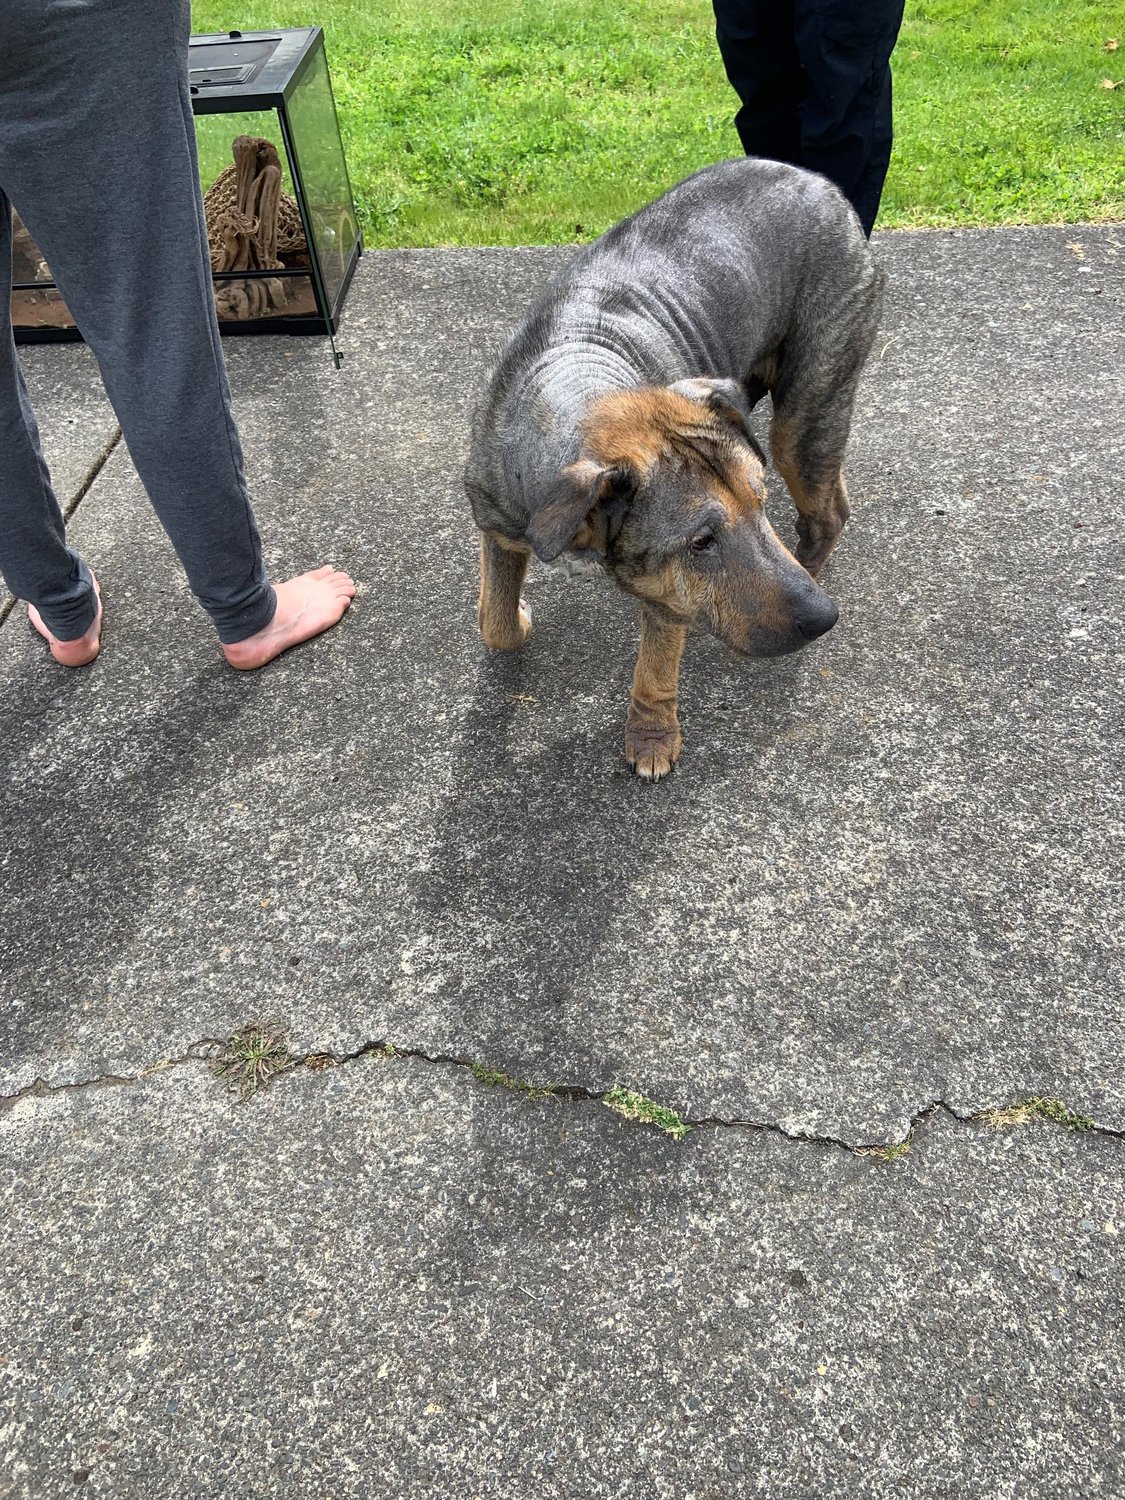 A dog named Dexter and a large lizard were two of three animals firefighters rescued from a house fire in the 700 block of Hoffman Street in Woodland on May 18.